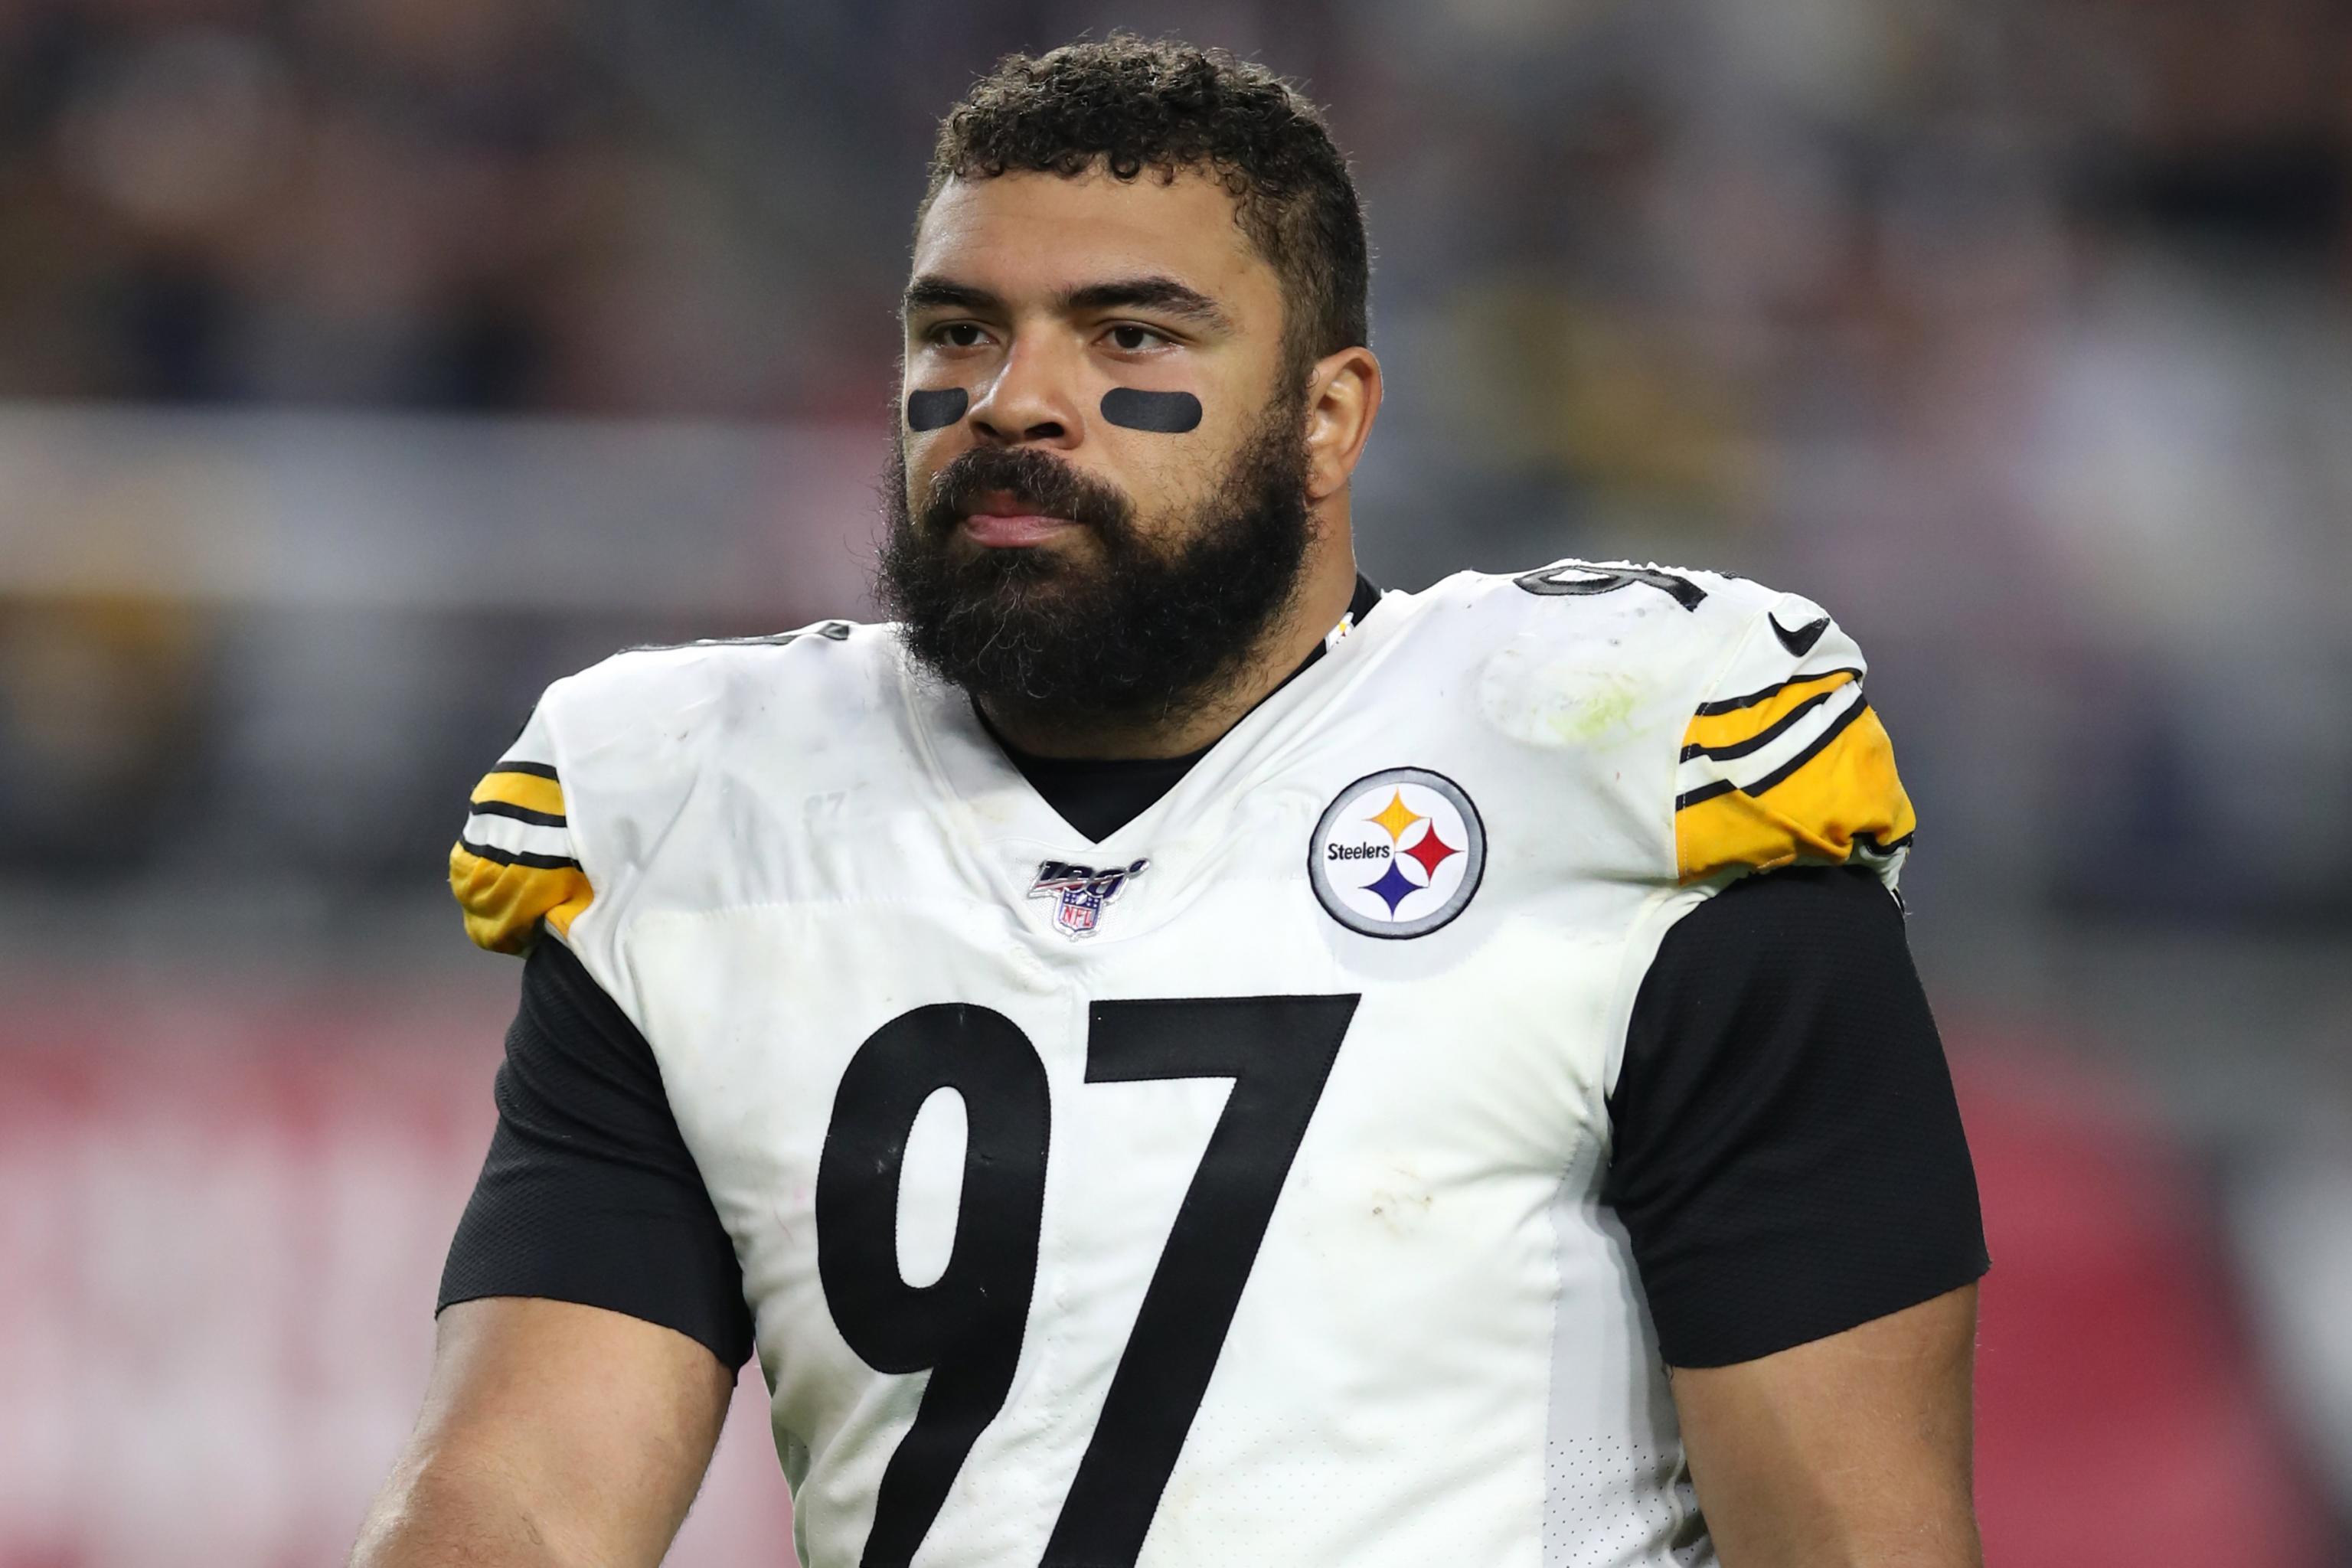 Cameron Heyward, Steelers Agree to Reported 4-Year, $71.4M